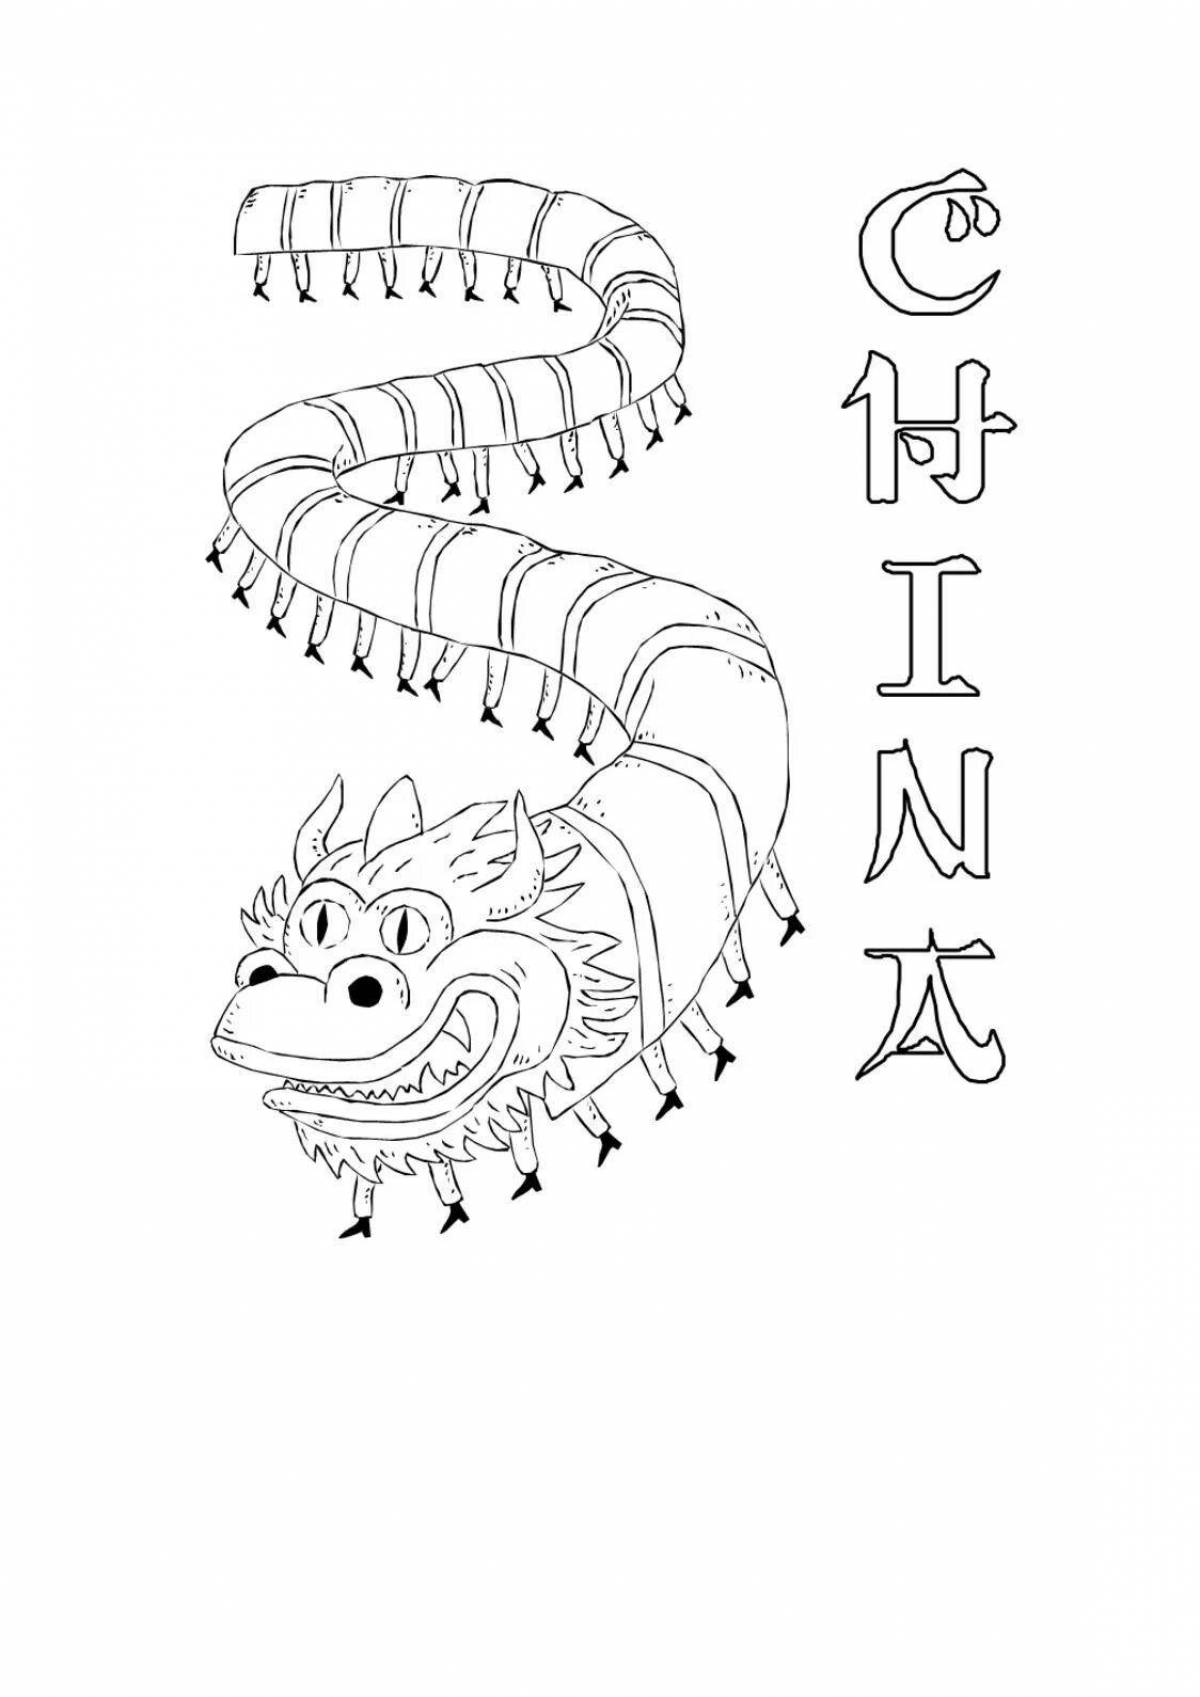 Impressive Chinese dragon coloring book for kids